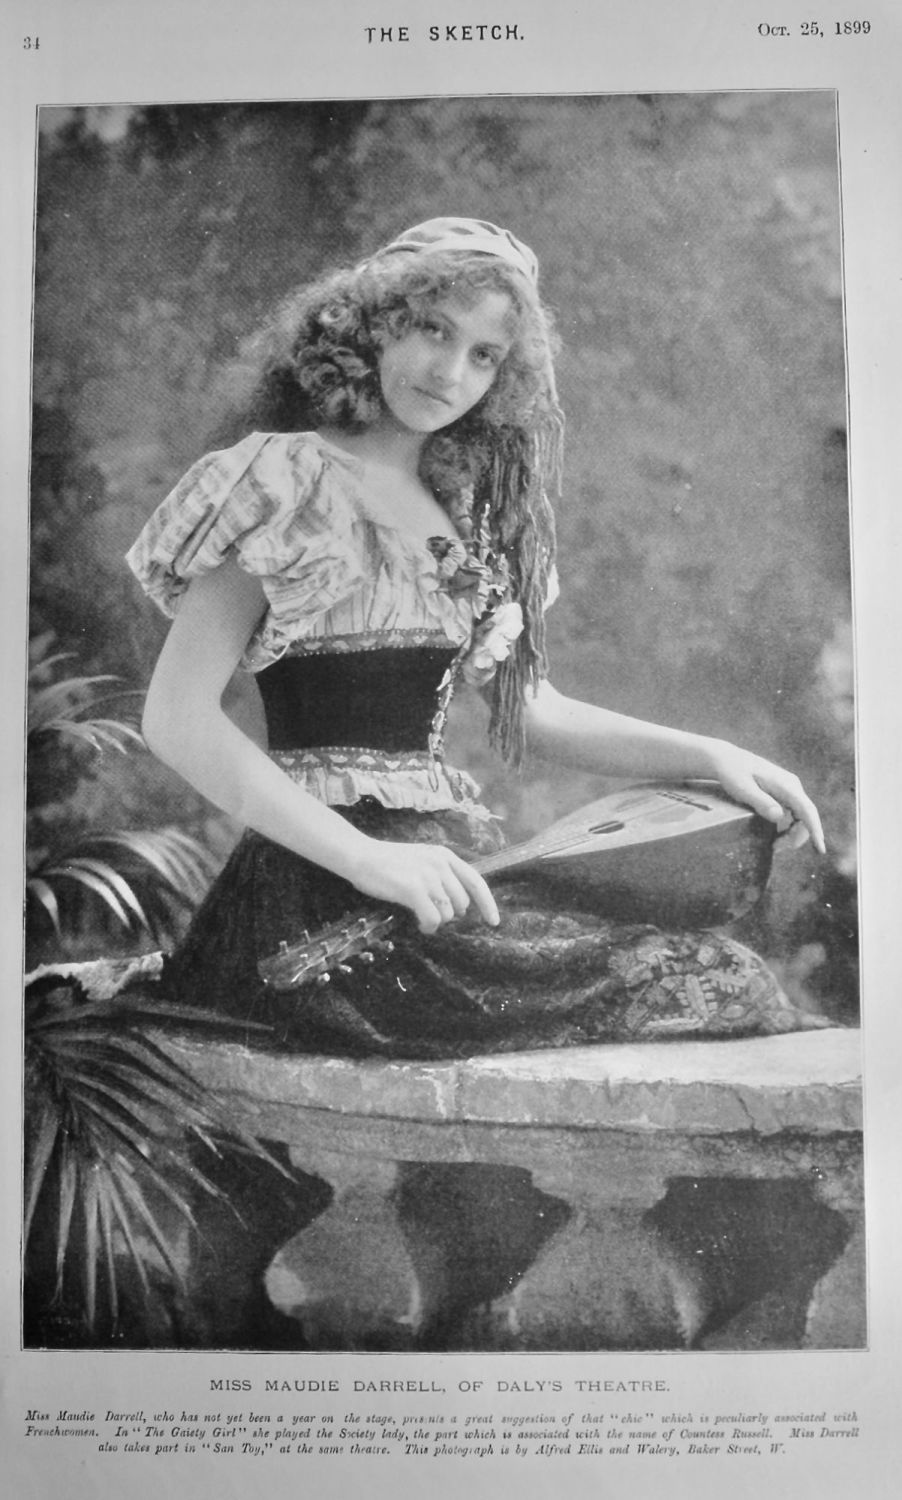 Miss Maudie Darrell, of Daly's Theatre.  1899.